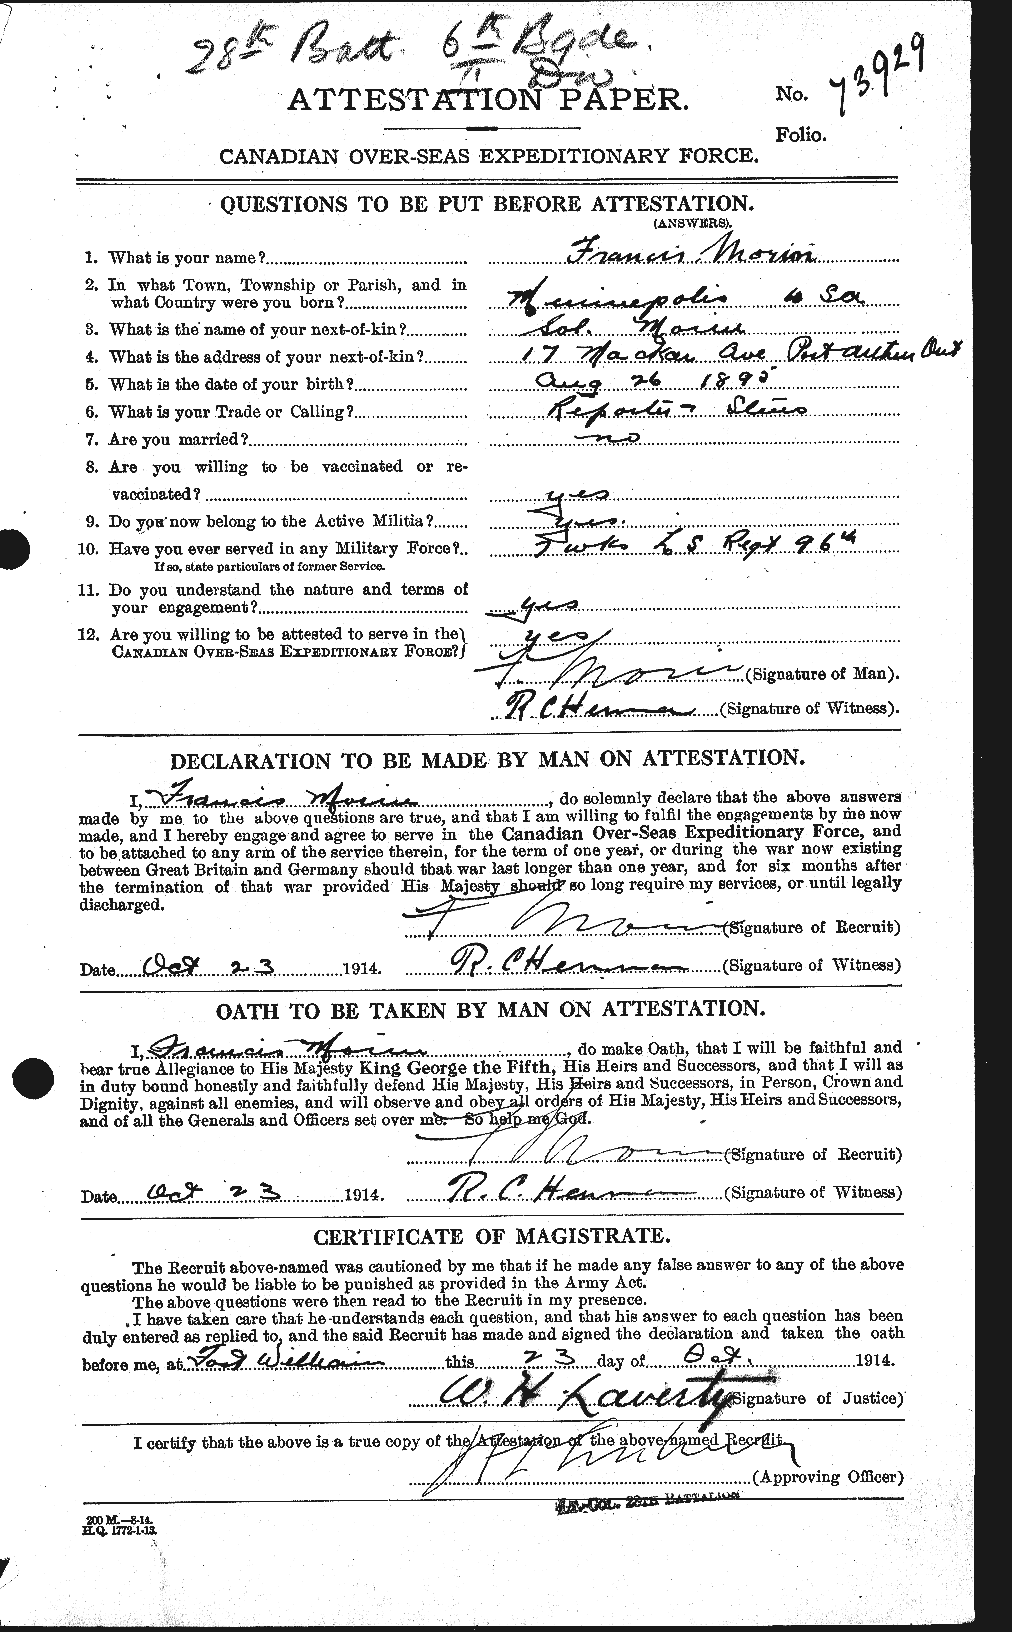 Personnel Records of the First World War - CEF 507259a